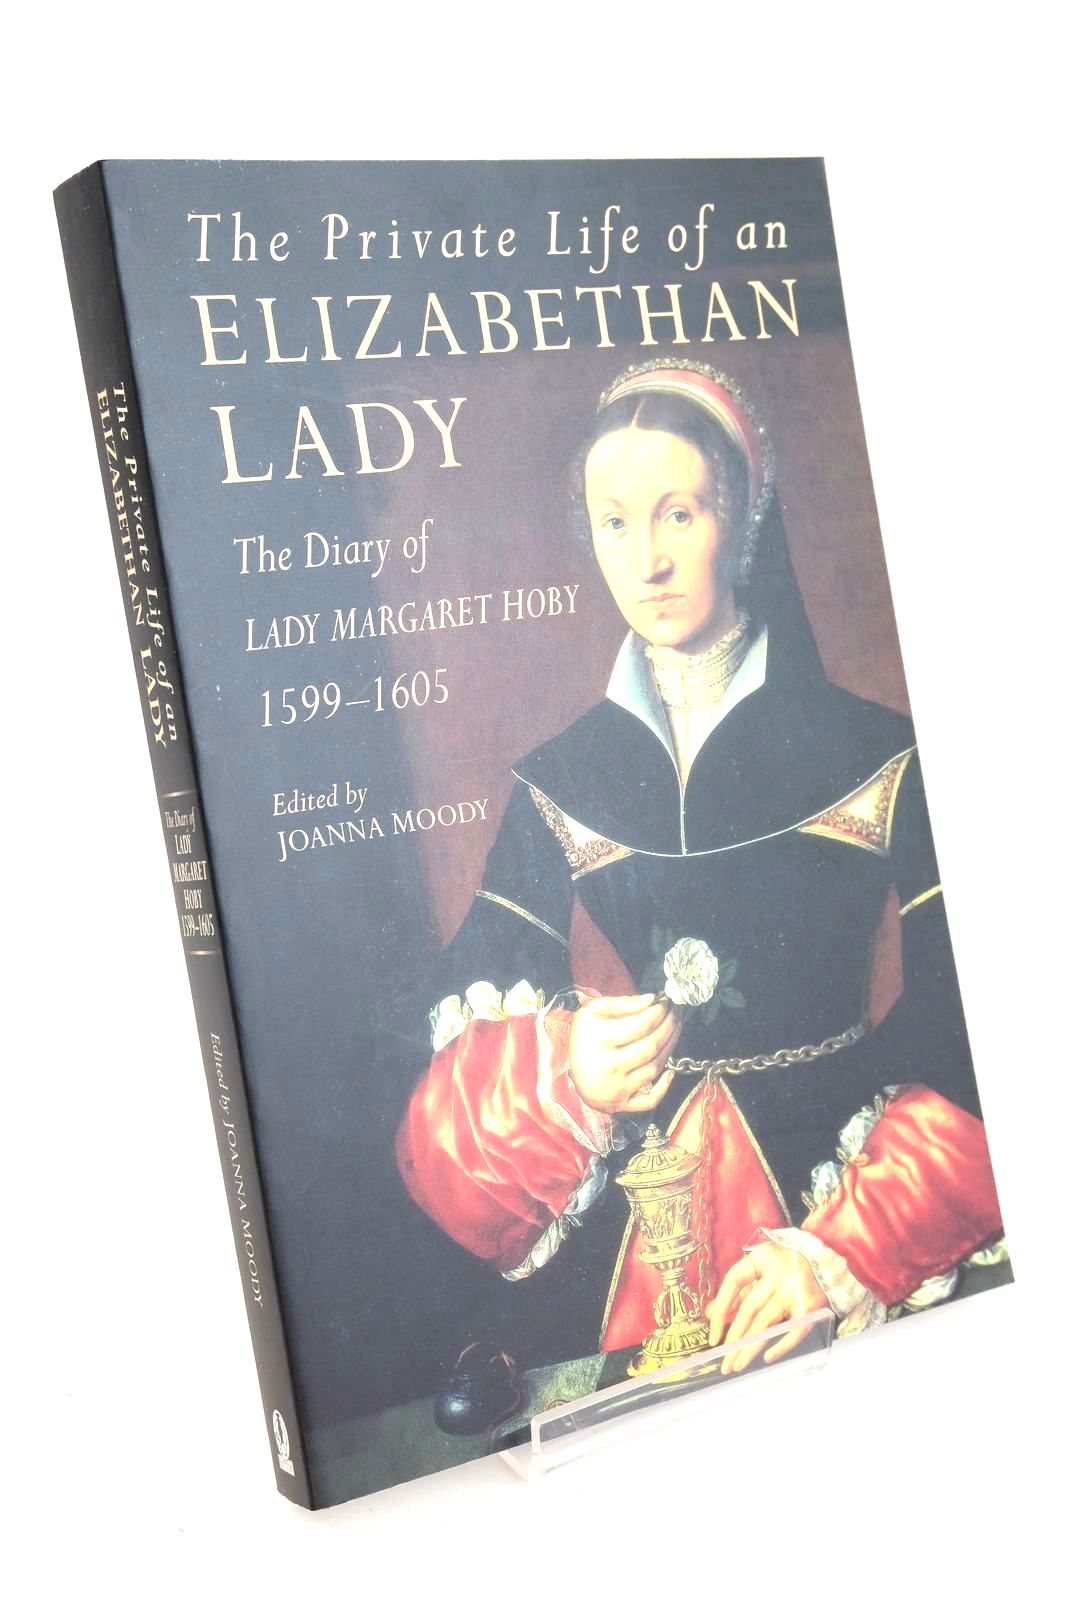 Photo of THE PRIVATE LIFE OF AN ELIZABETHAN LADY: THE DIARY OF LADY MARGARET HOBY 1599-1605 written by Moody, Joanna published by Sutton Publishing (STOCK CODE: 1327713)  for sale by Stella & Rose's Books